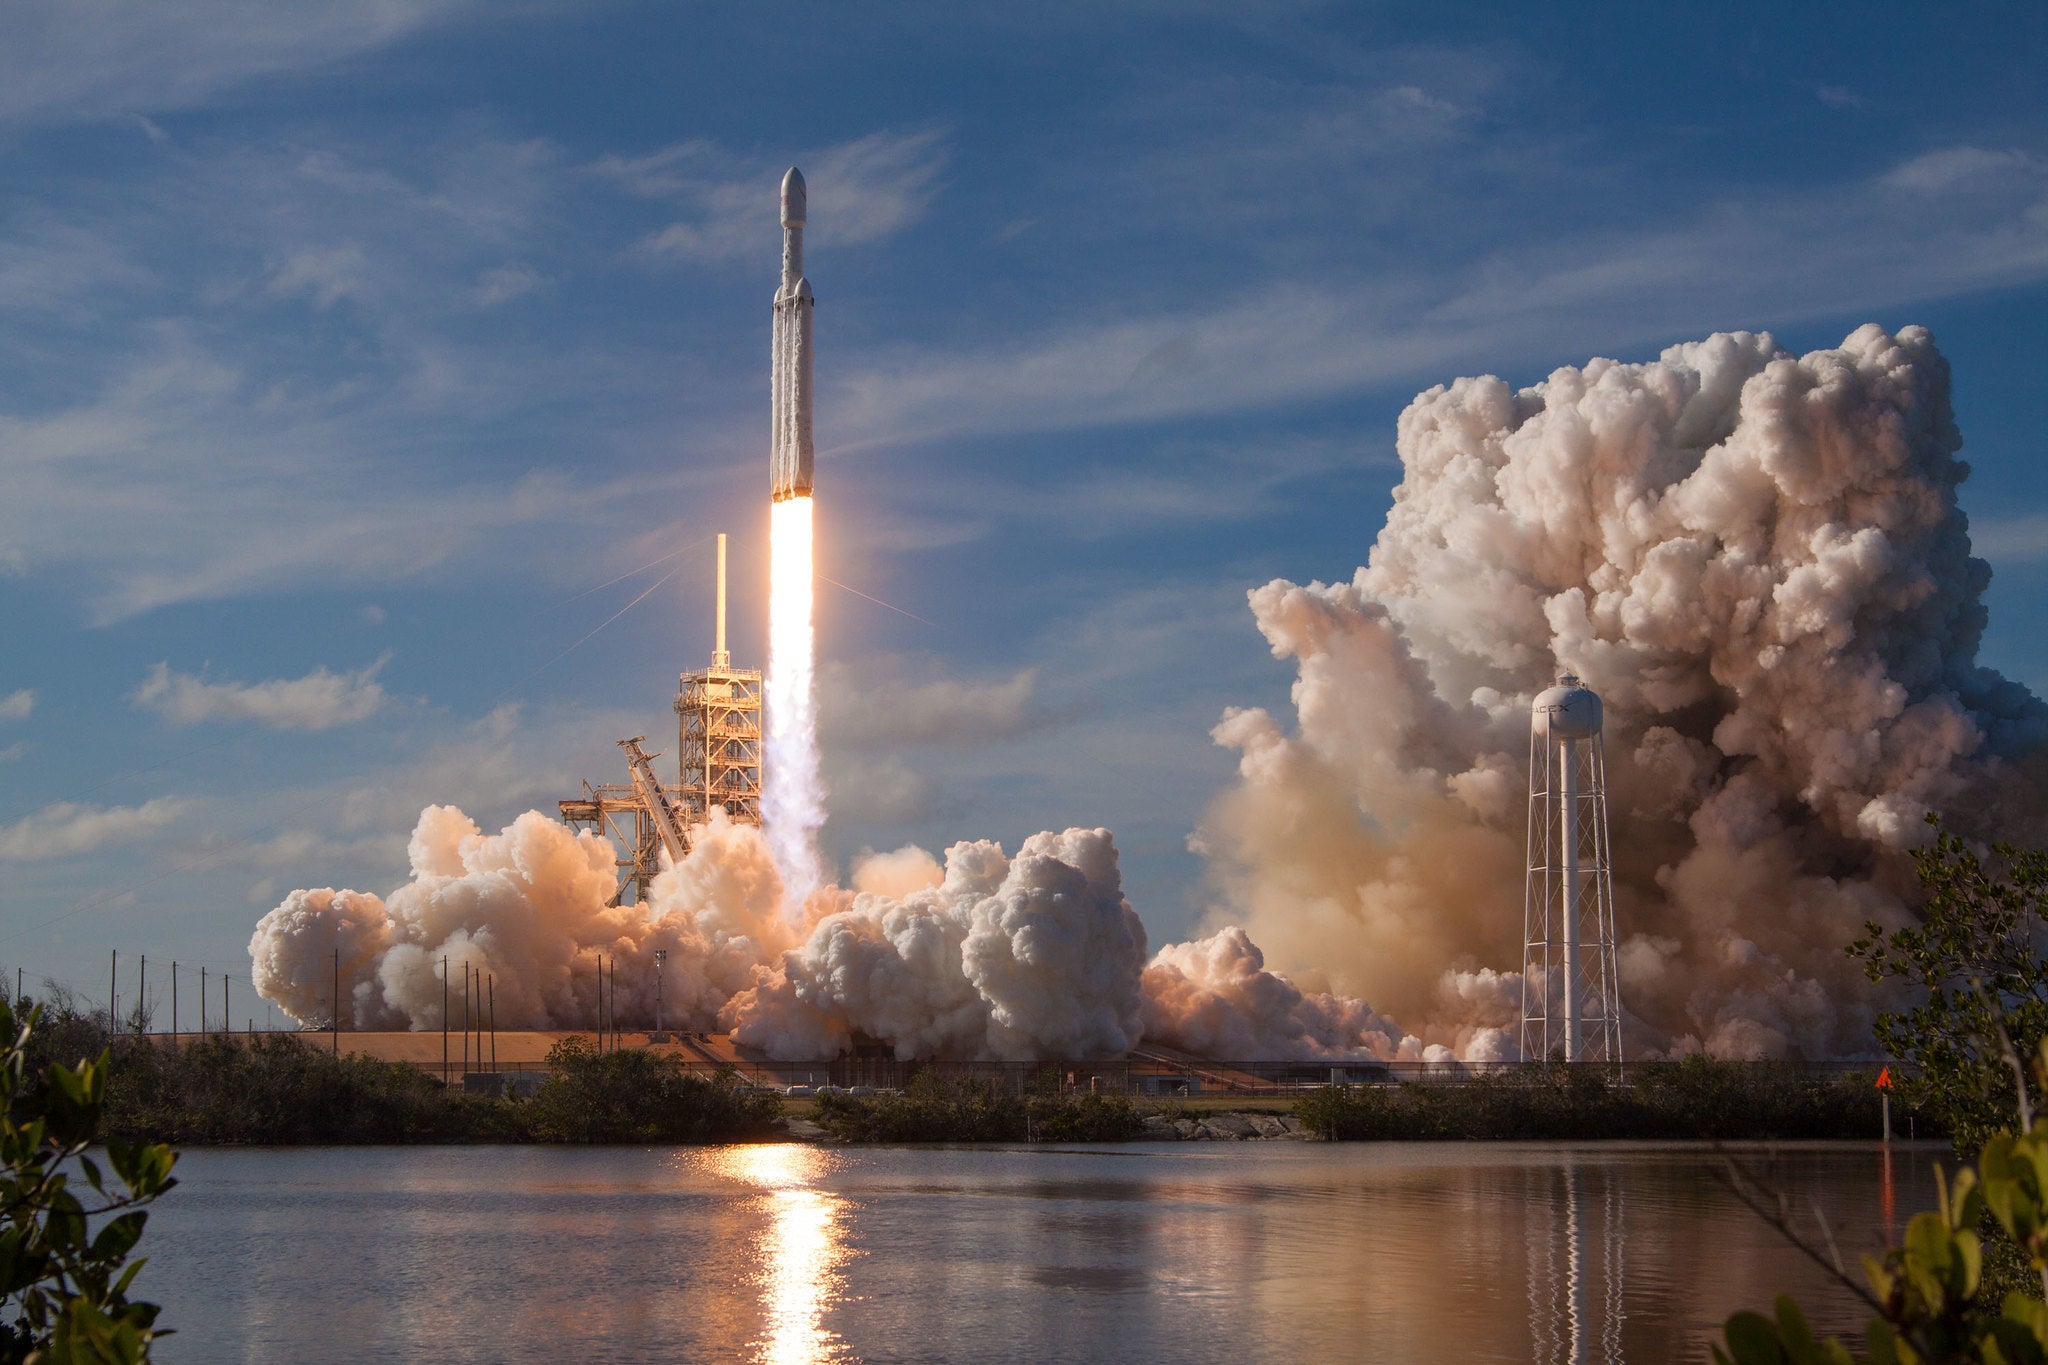 SpaceX’s powerful Falcon Heavy rocket will launch payloads for the U.S. Space Force